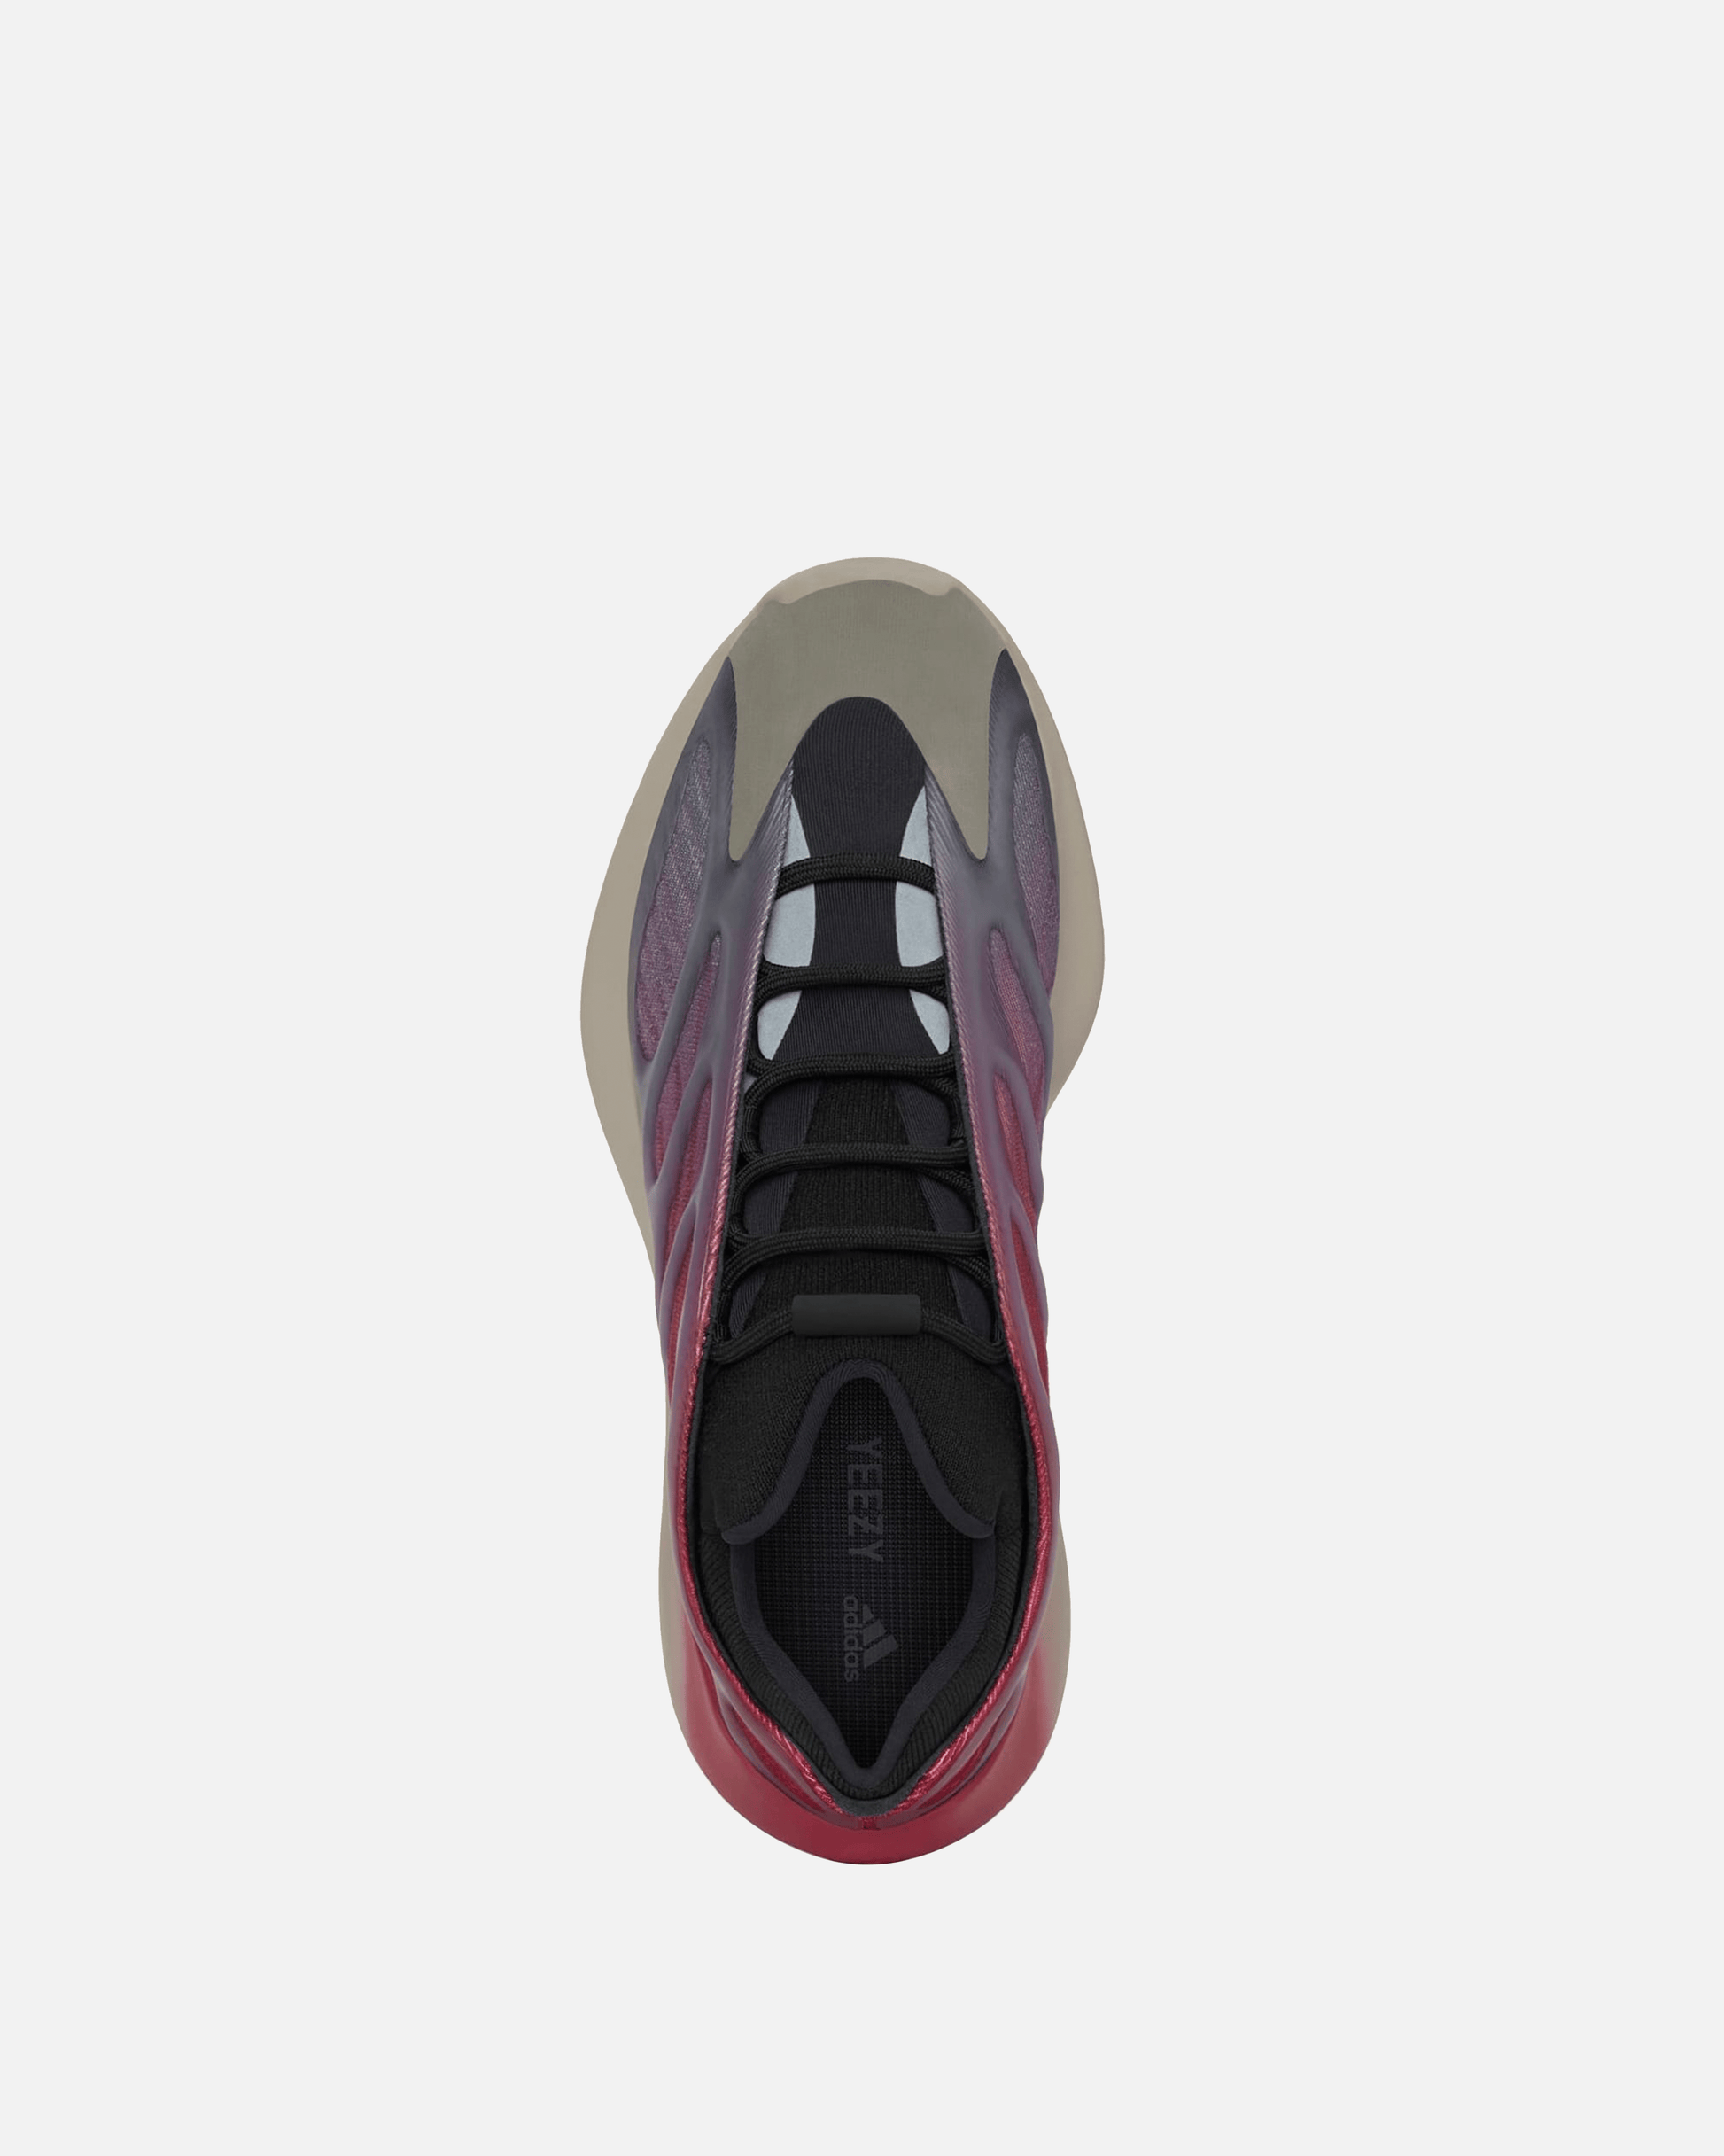 Adidas Releases Yeezy 700 V3 'Fade Carbon'